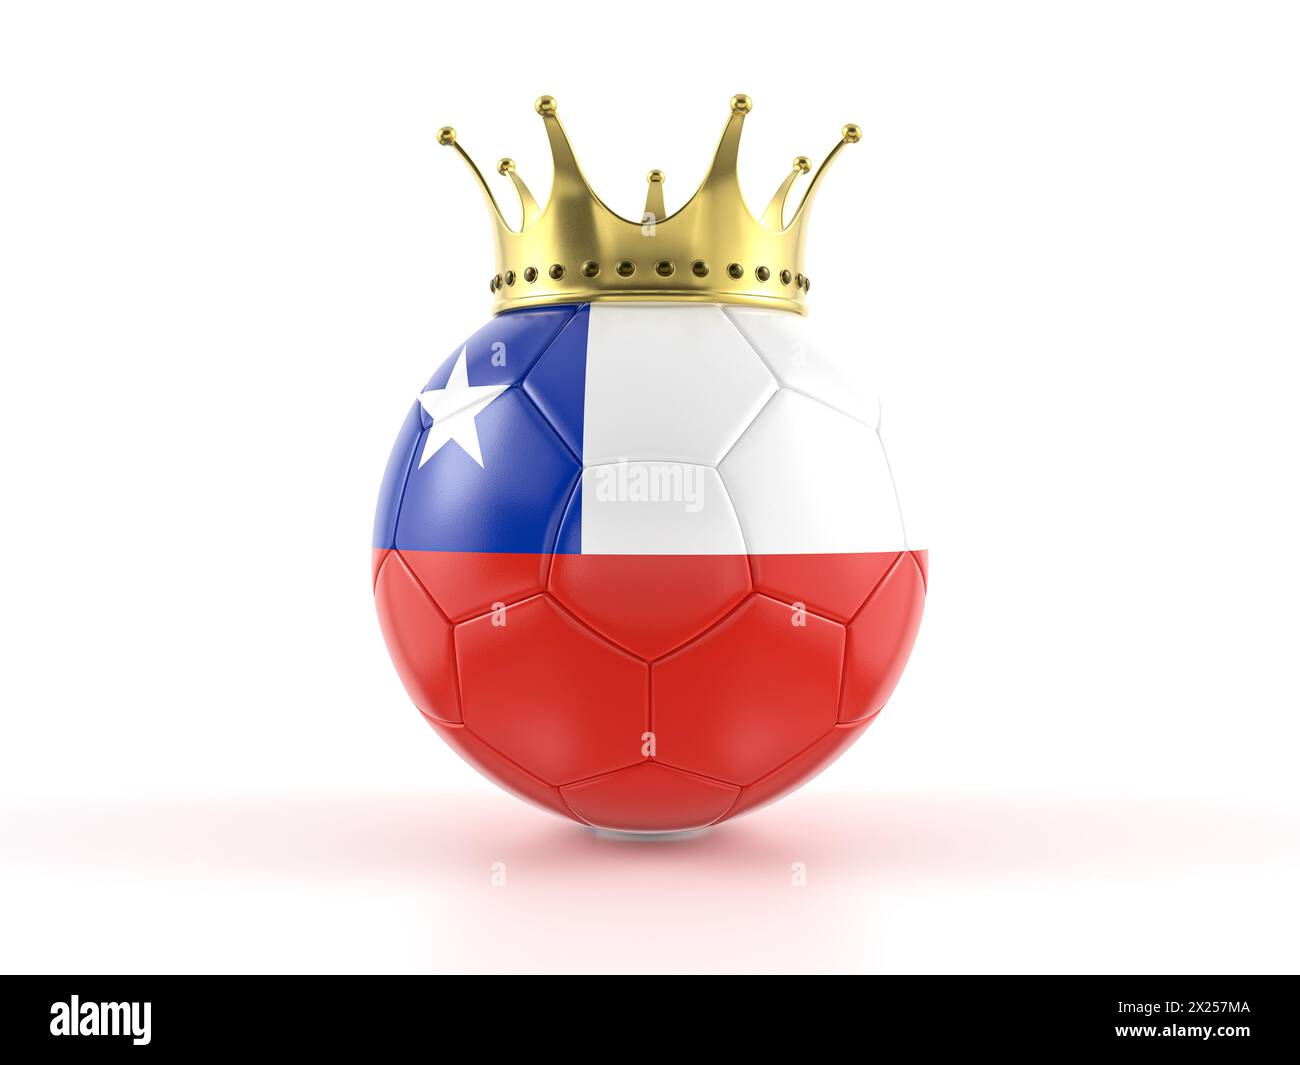 Chile flag soccer ball with crown on a white background. 3d illustration. Stock Photo